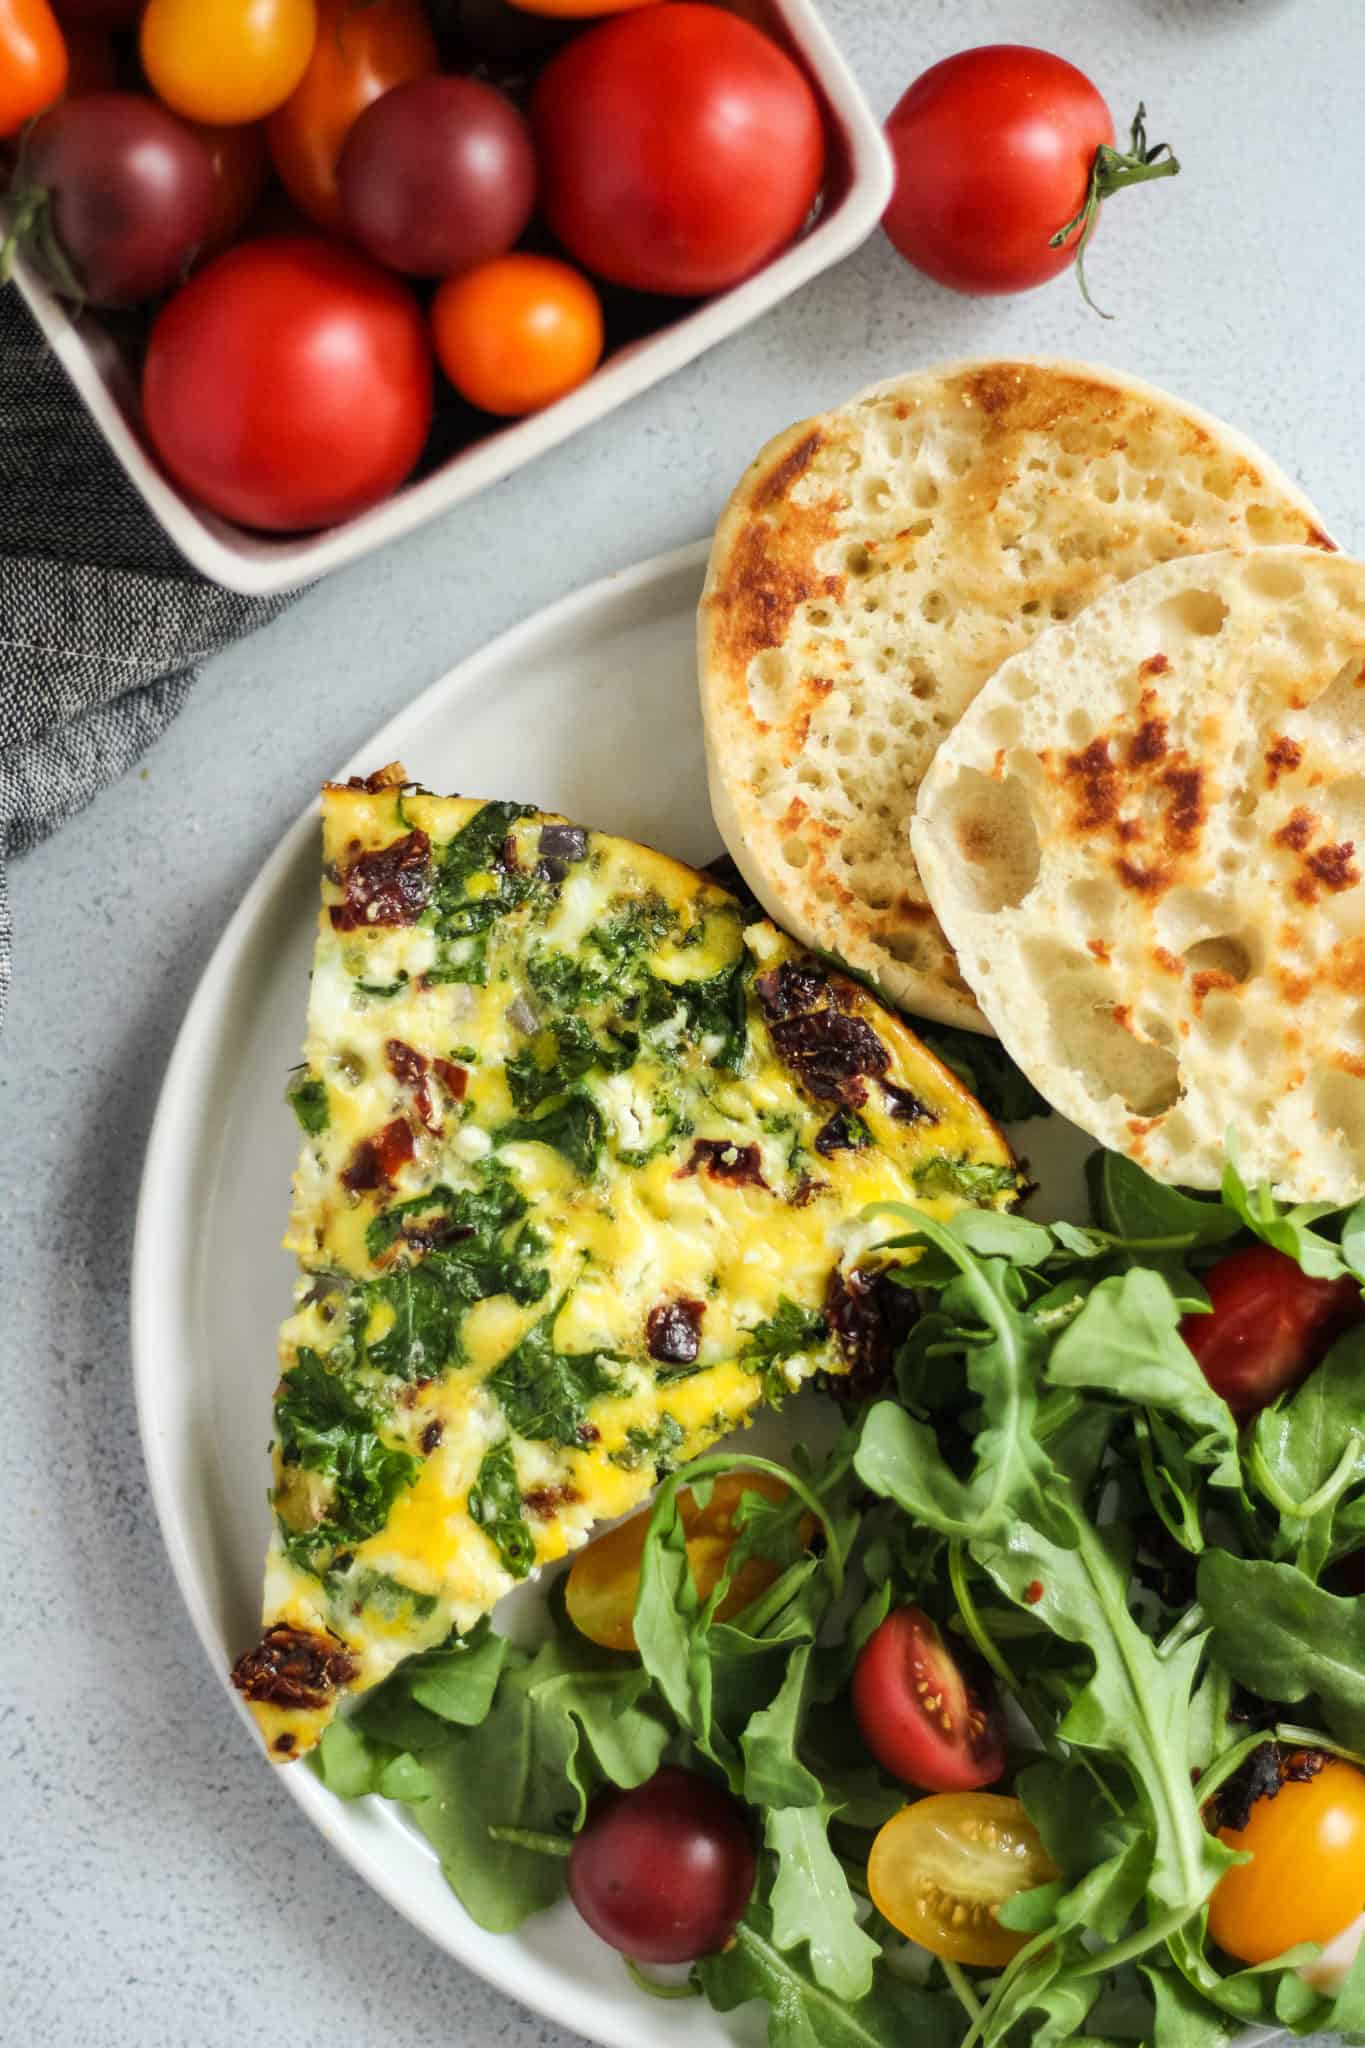 Add this Sun-Dried Tomato and Kale Frittata to your breakfast or brunch menu - plus, learn about the nutrition benefits of eggs!